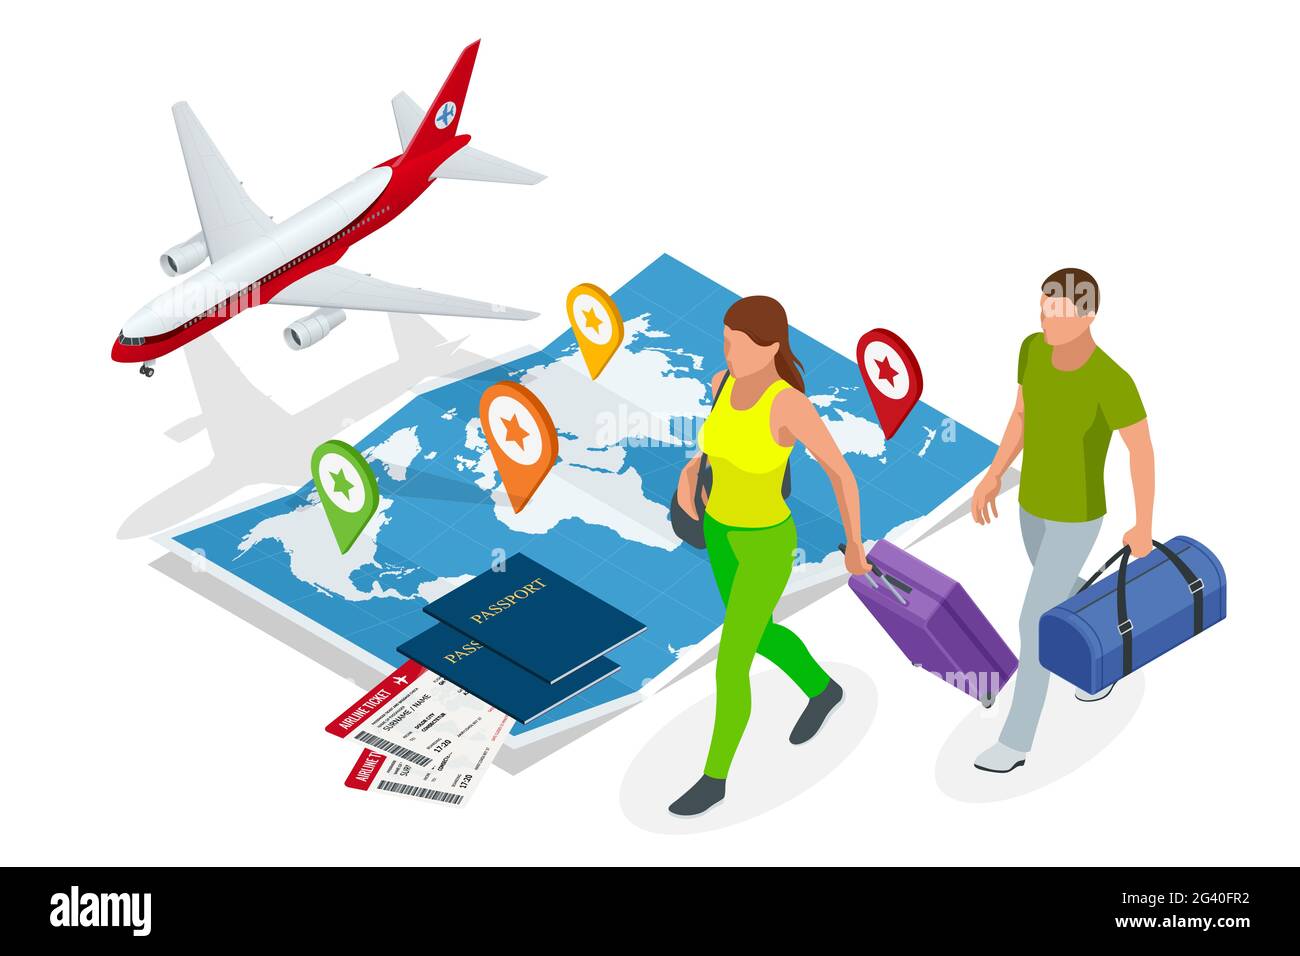 Isometric Business travel and tourism concept. Air tickets or boarding pass, passports on world map. Buying or booking online tickets. Stock Vector